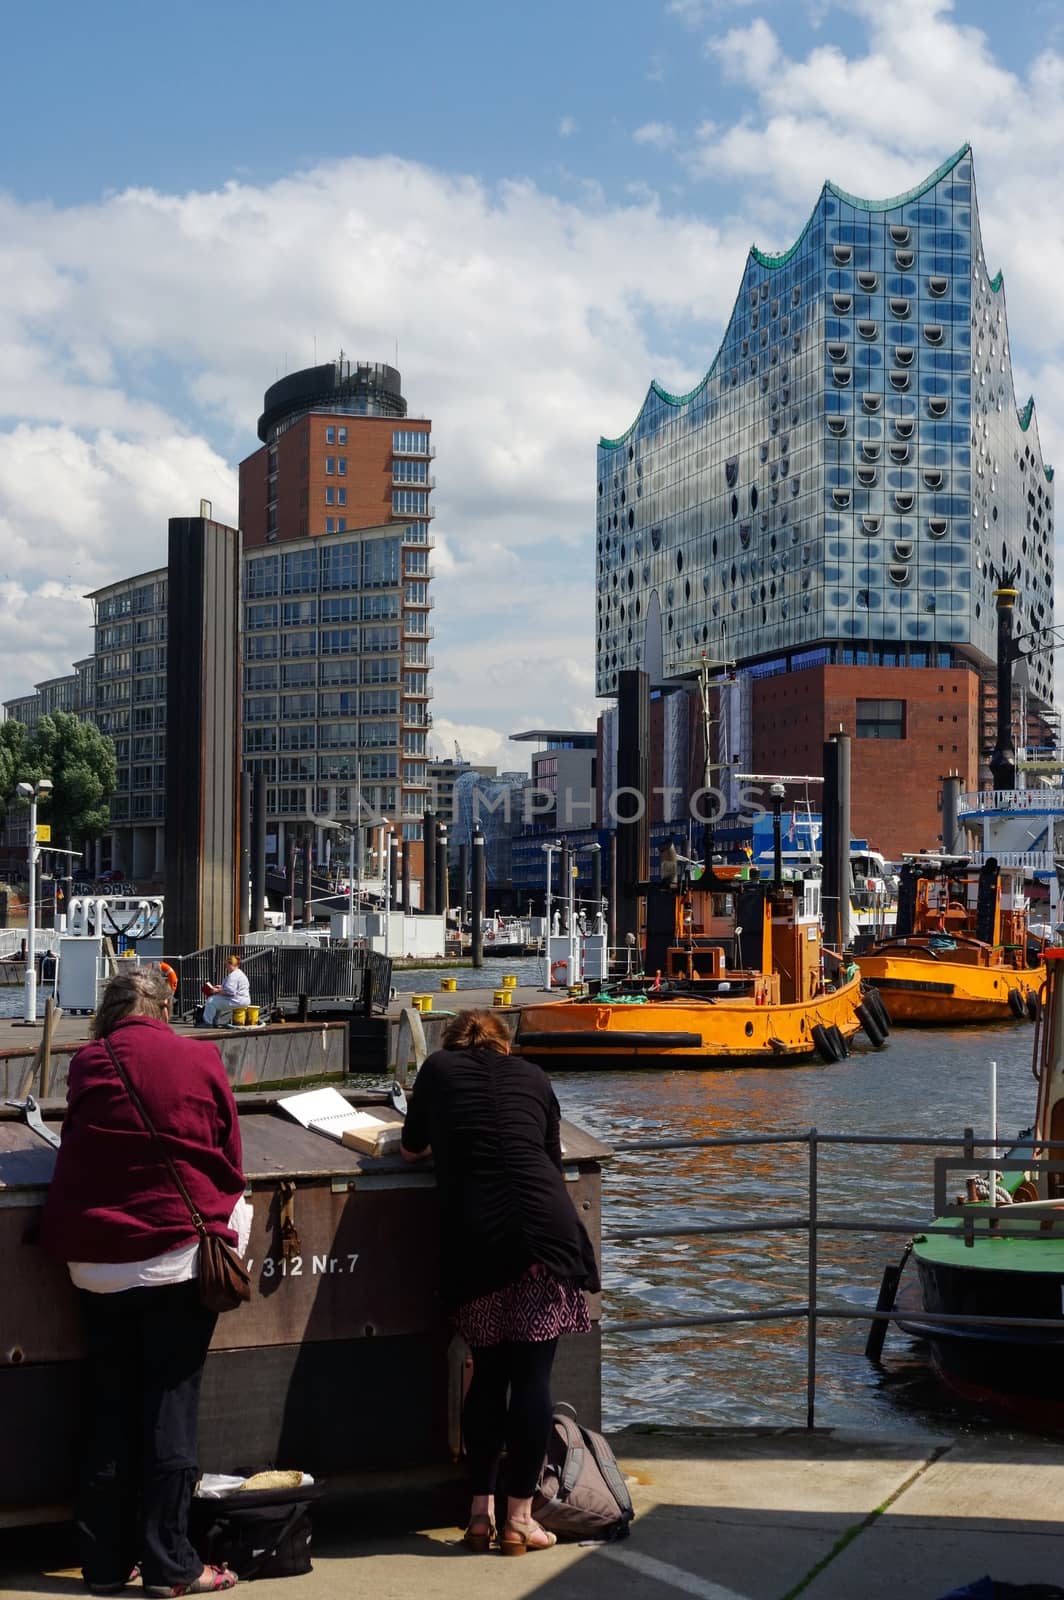 HAMBURG, GERMANY - JULY 18, 2015: the View of Hamburg from the port place, Hamburg is the second largest city in Germany and the eighth largest city in the European Union. by evolutionnow